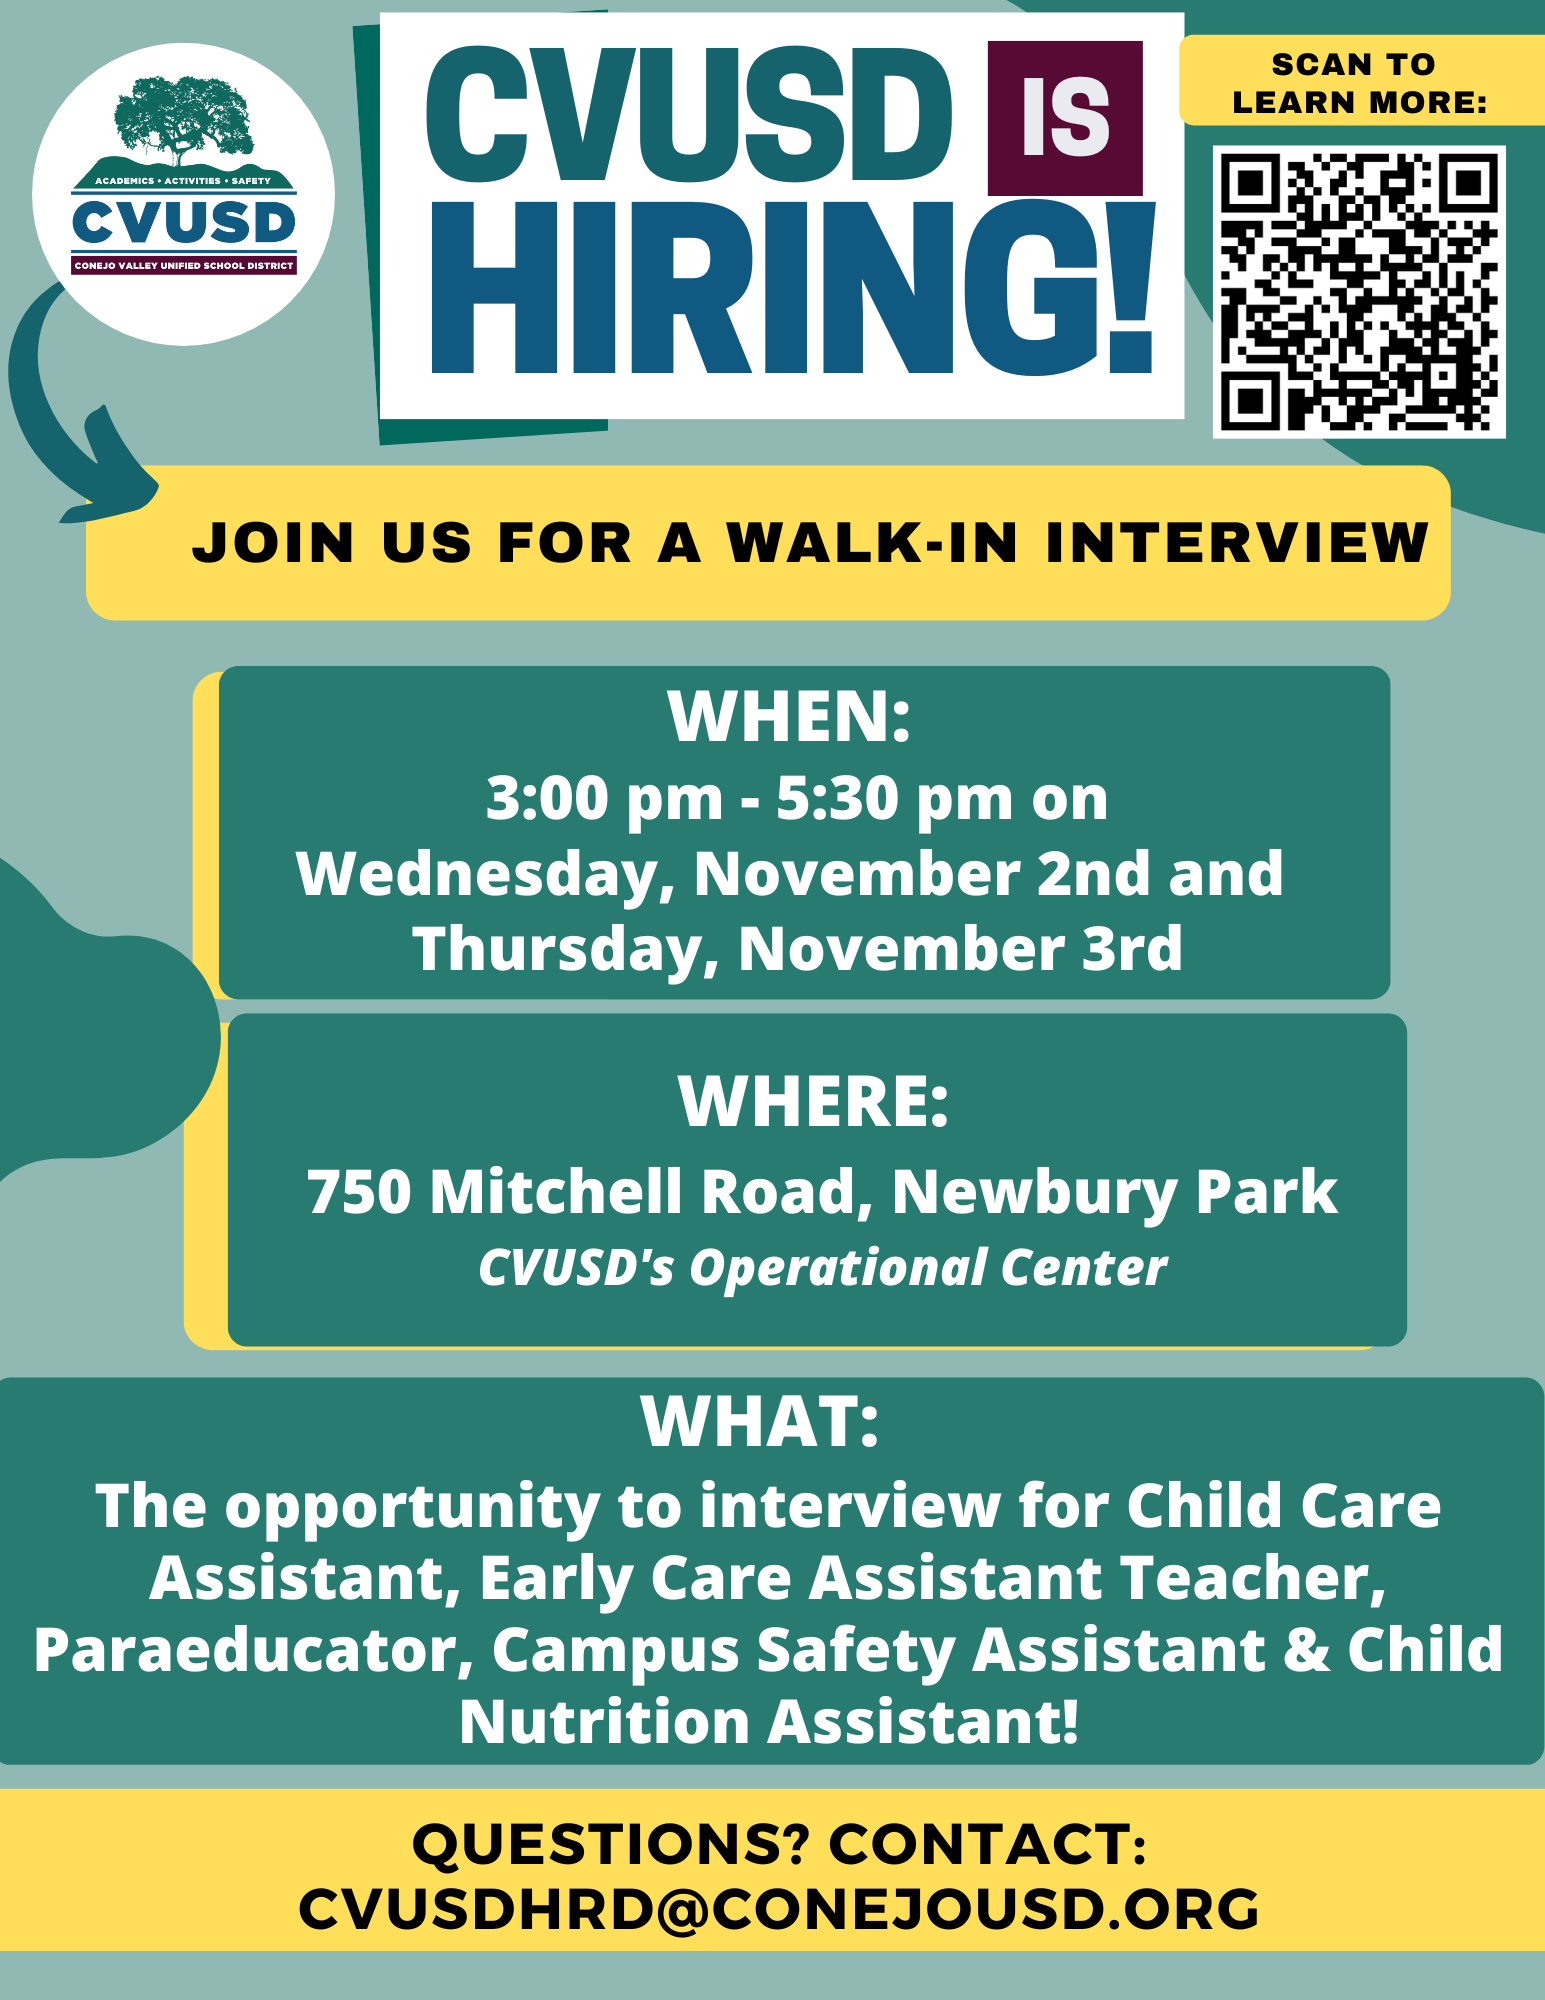  We're Hiring! Attend An Upcoming Walk-In Interview Opportunity